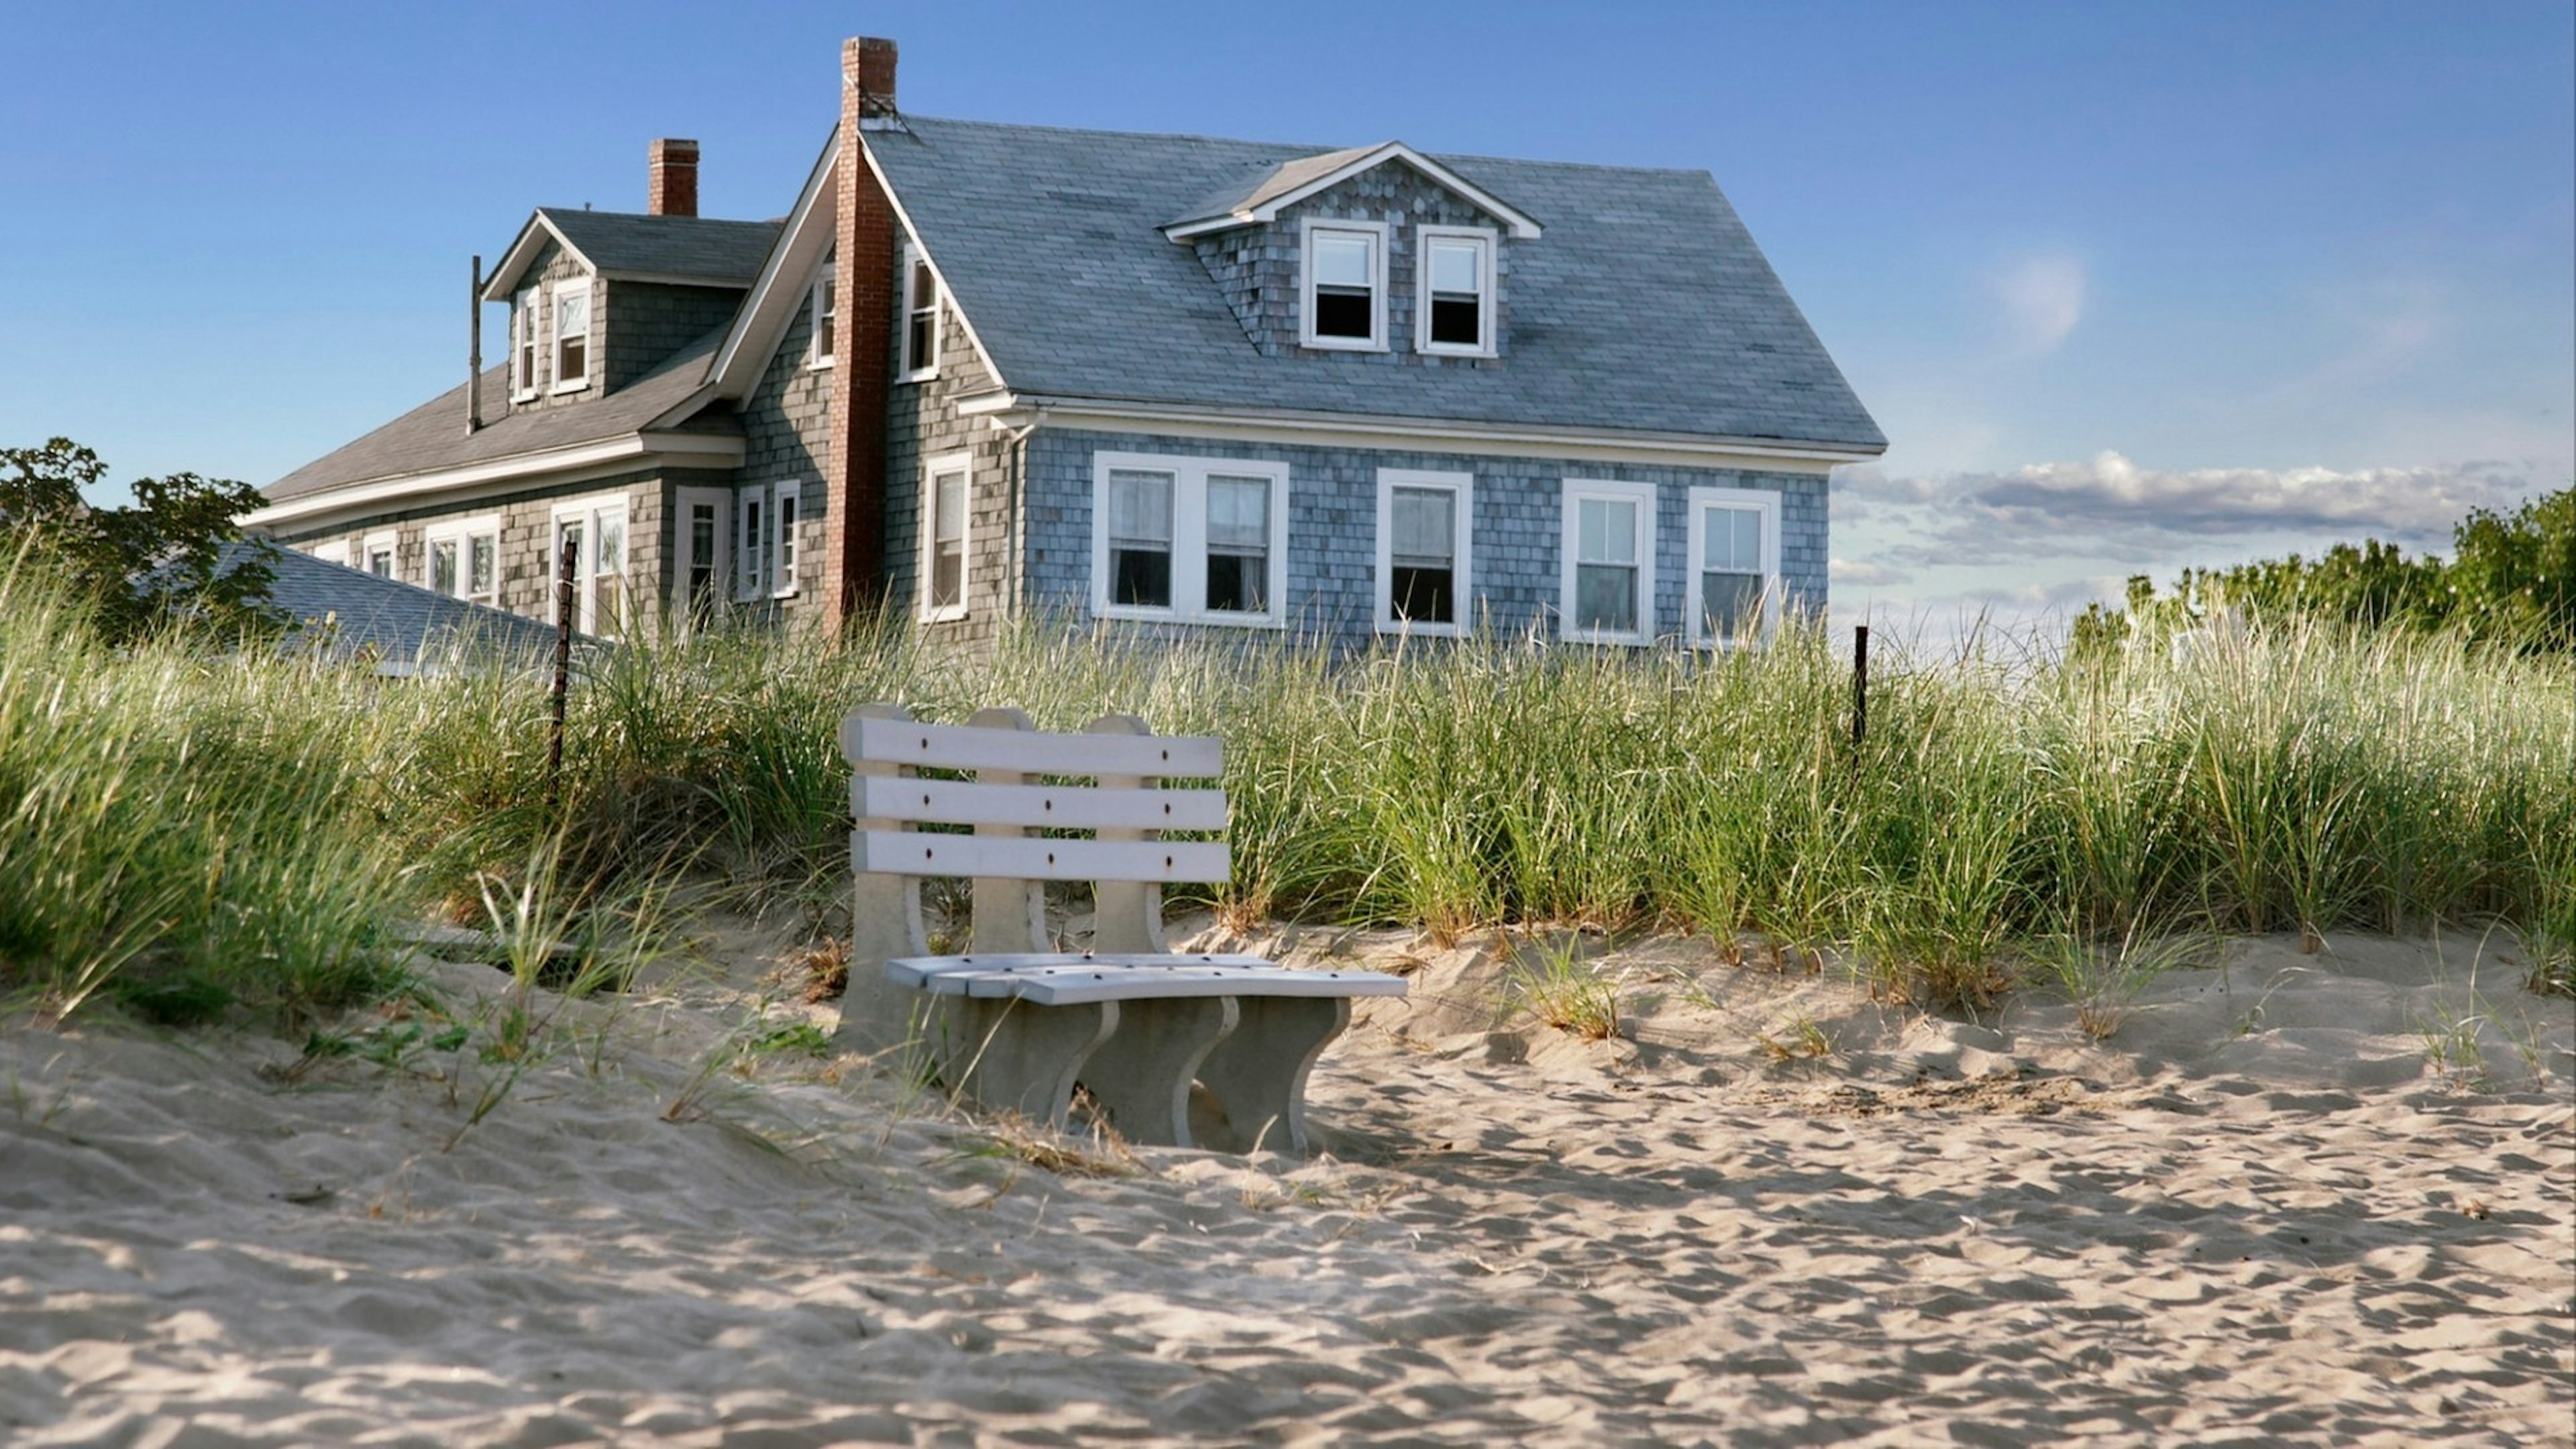 New England beach cottage, overlooking the dunes and the beach